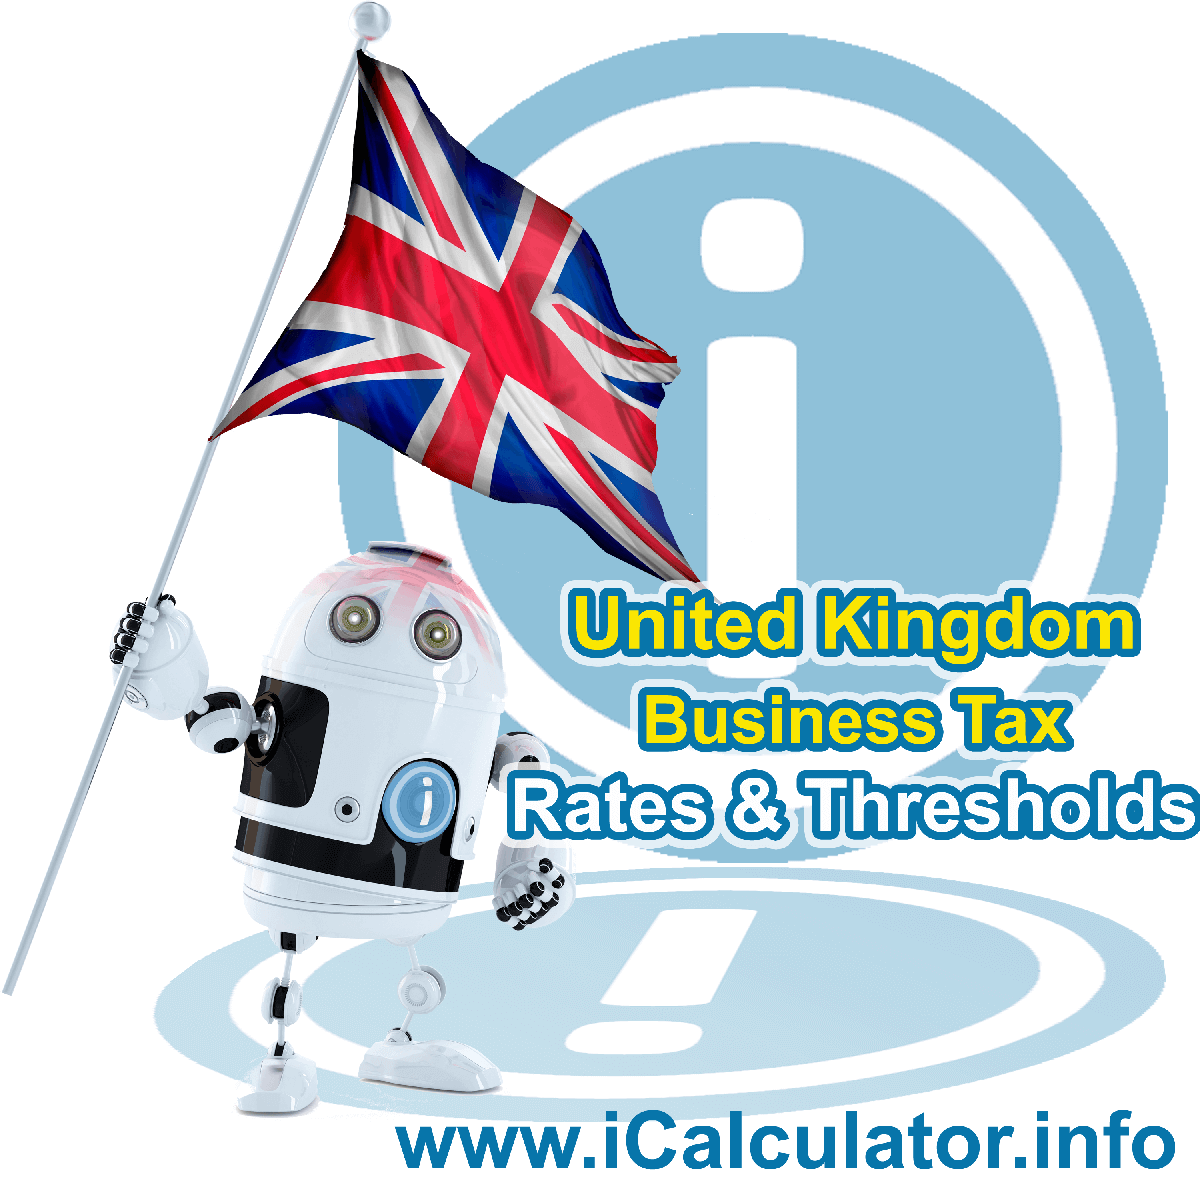 United Kingdom Corporation Tax Rates in 2009. This image shows the United Kingdom flag and information relating to the corporation tax formula for the United Kingdom Corporation Tax Calculator in 2009